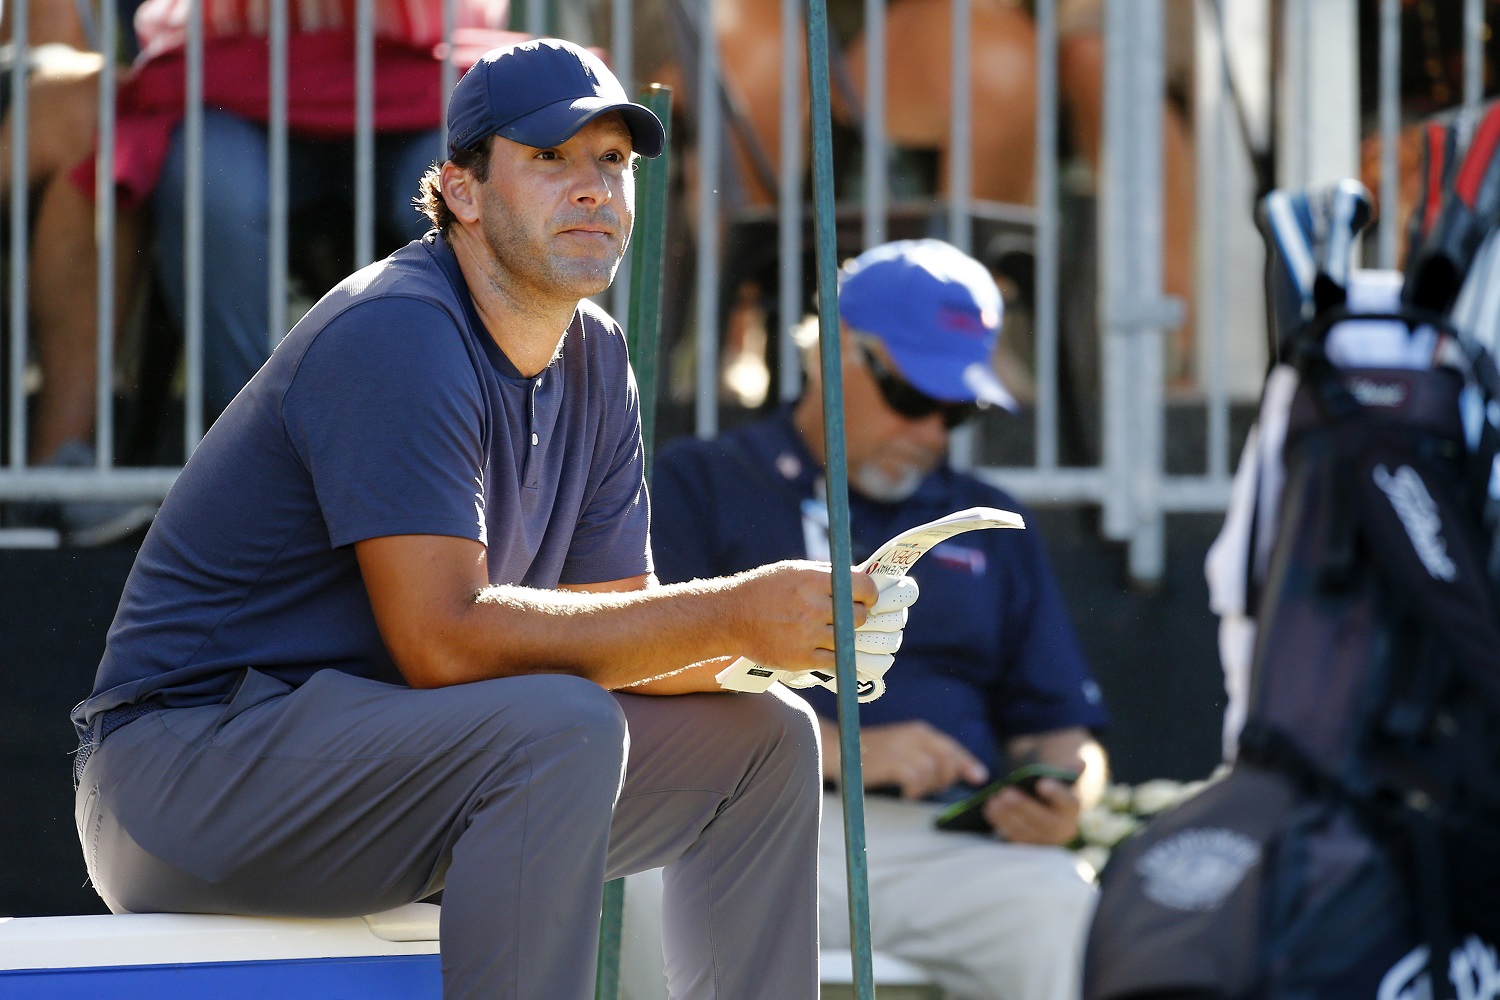 Tony Romo looks on during the second round of the Safeway Open at Silverado Resort on Sept. 27, 2019 ,in Napa, California.